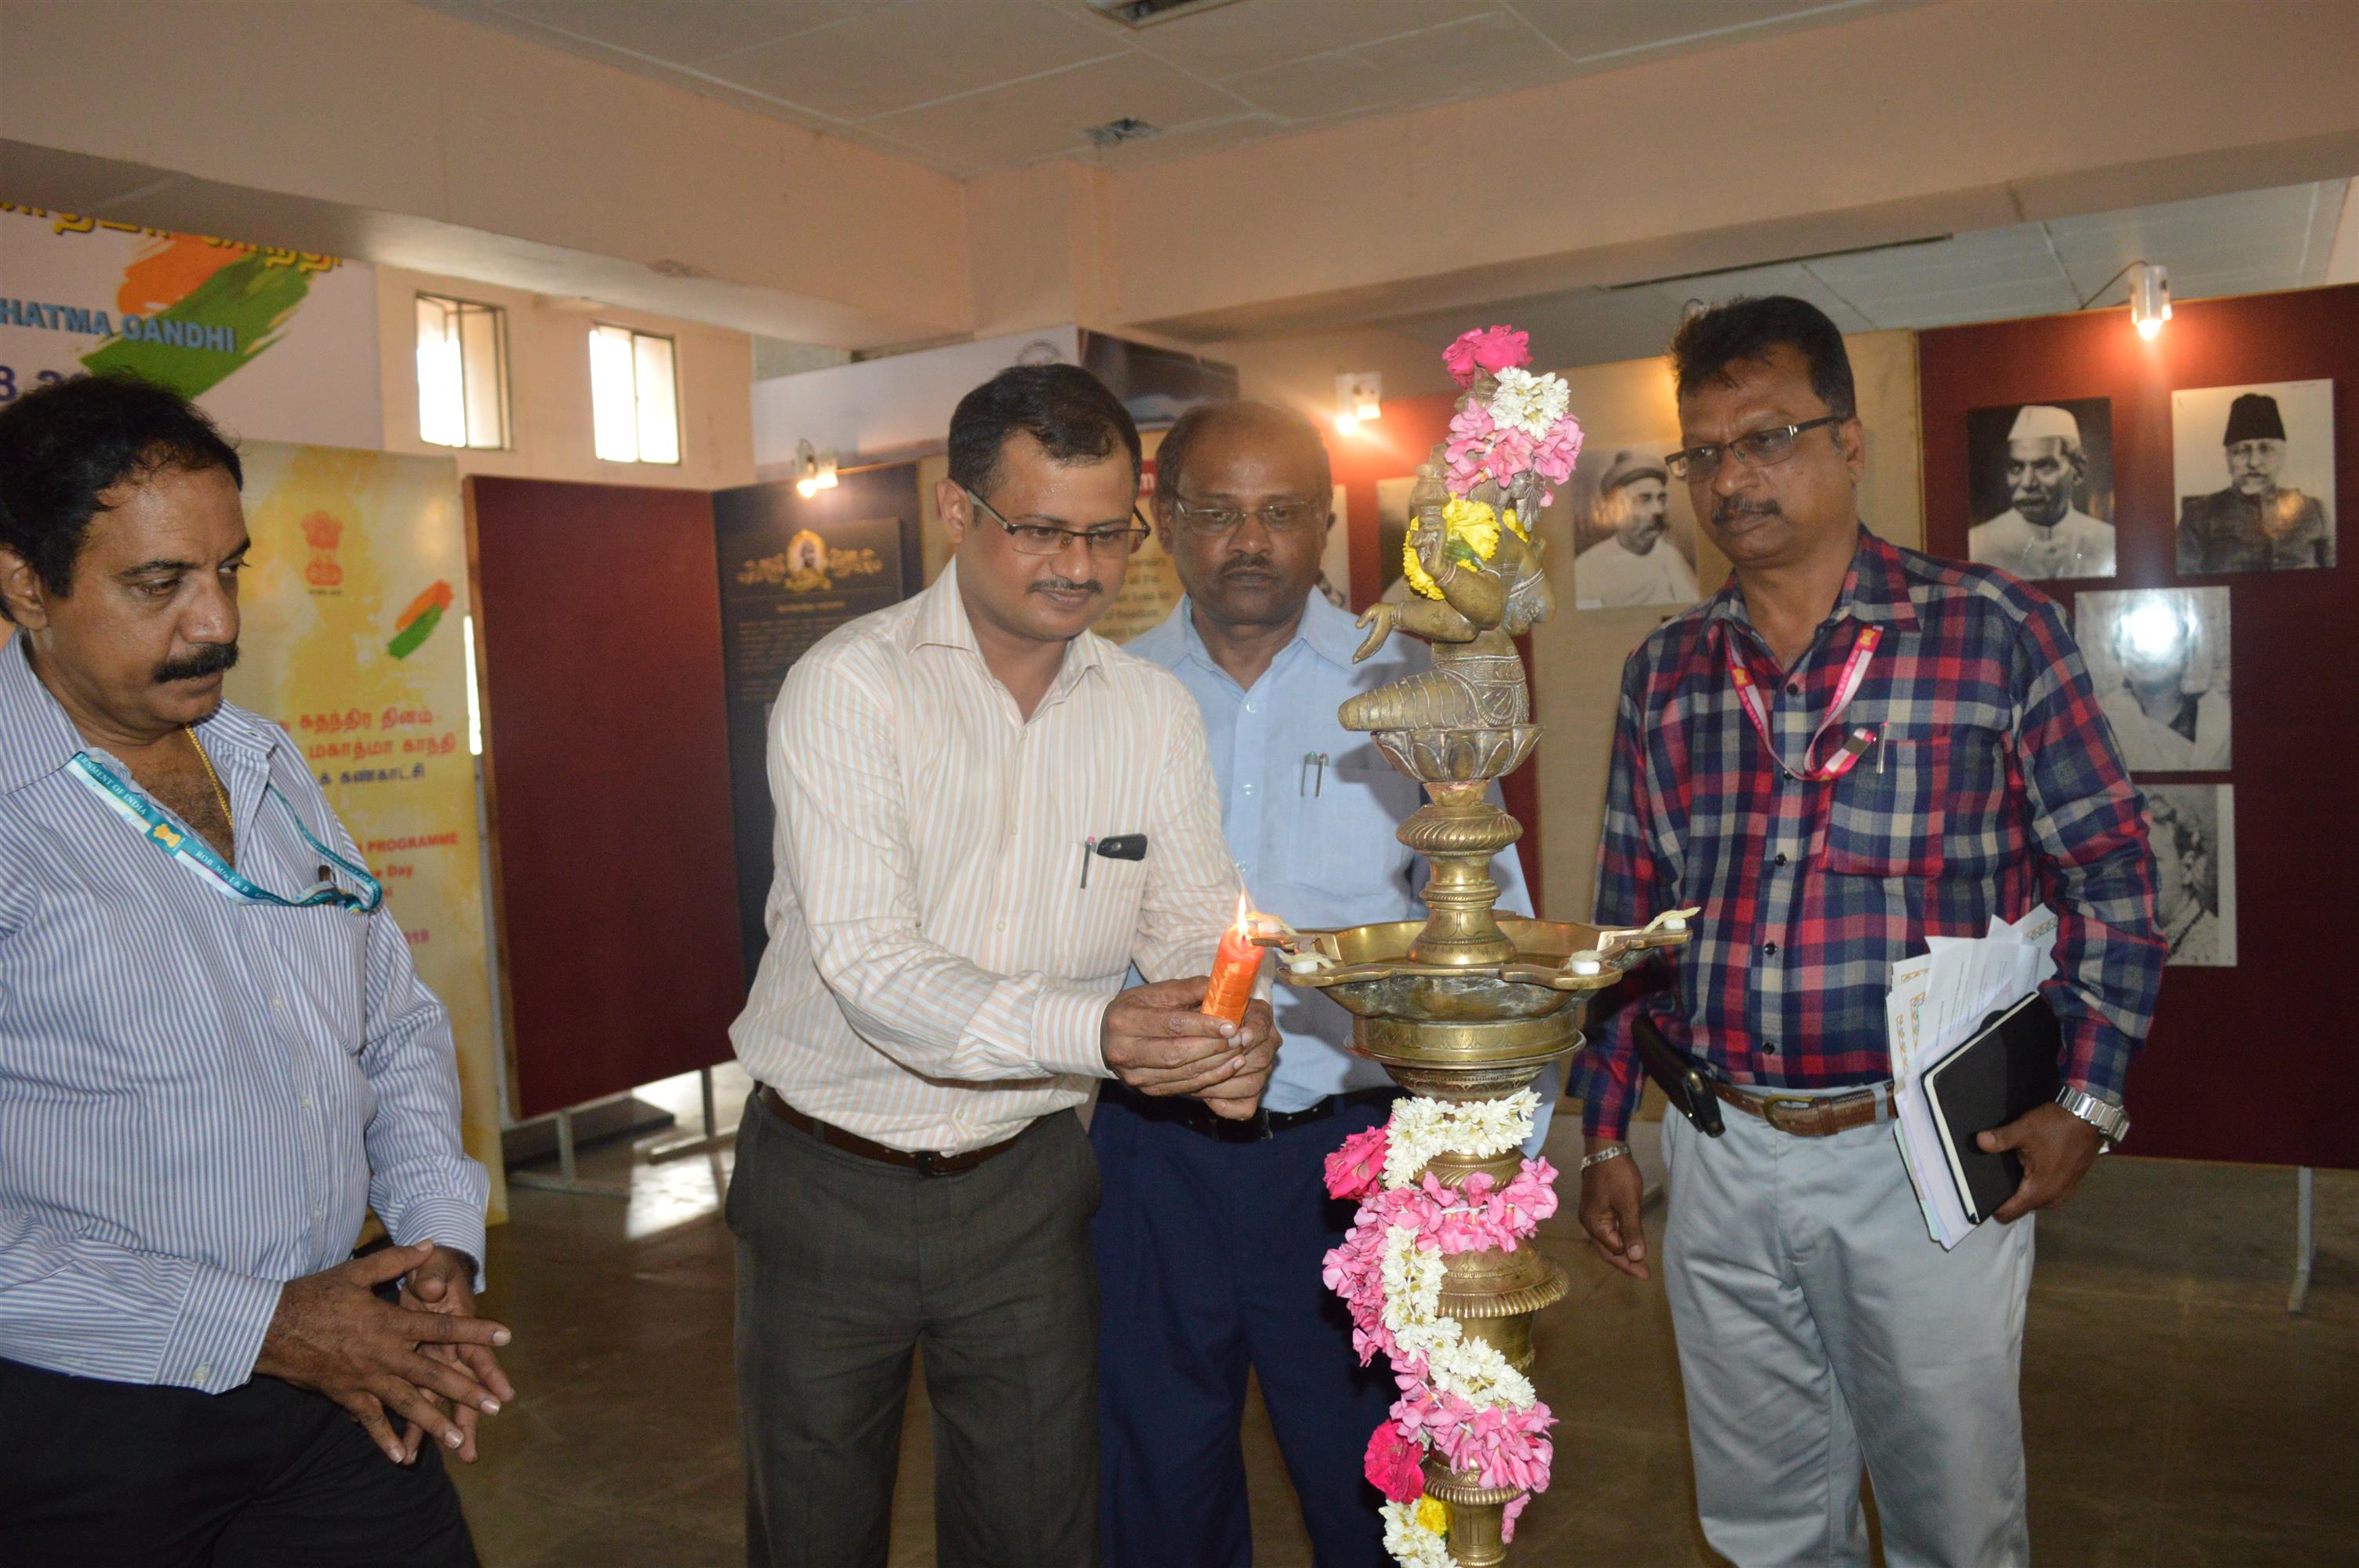 Shri. P.K. Ashok Babu, IFS, Regional Passport Officer inaugurating the Exhibition and Special awareness camp on 150th Birth Anniversary of Mahatma Gandhi, 73rd Independence Day and Quit India Movement organized by the Regional Outreach Bureau, Ministry of Information & Broadcasting in Thiruvanmiyur Railway Station, Chennai today (13.08.2019). Shri. E. Mariappan, IIS, Additional Director General, Press Information Bureau & Regional Outreach Bureau is also seen. 